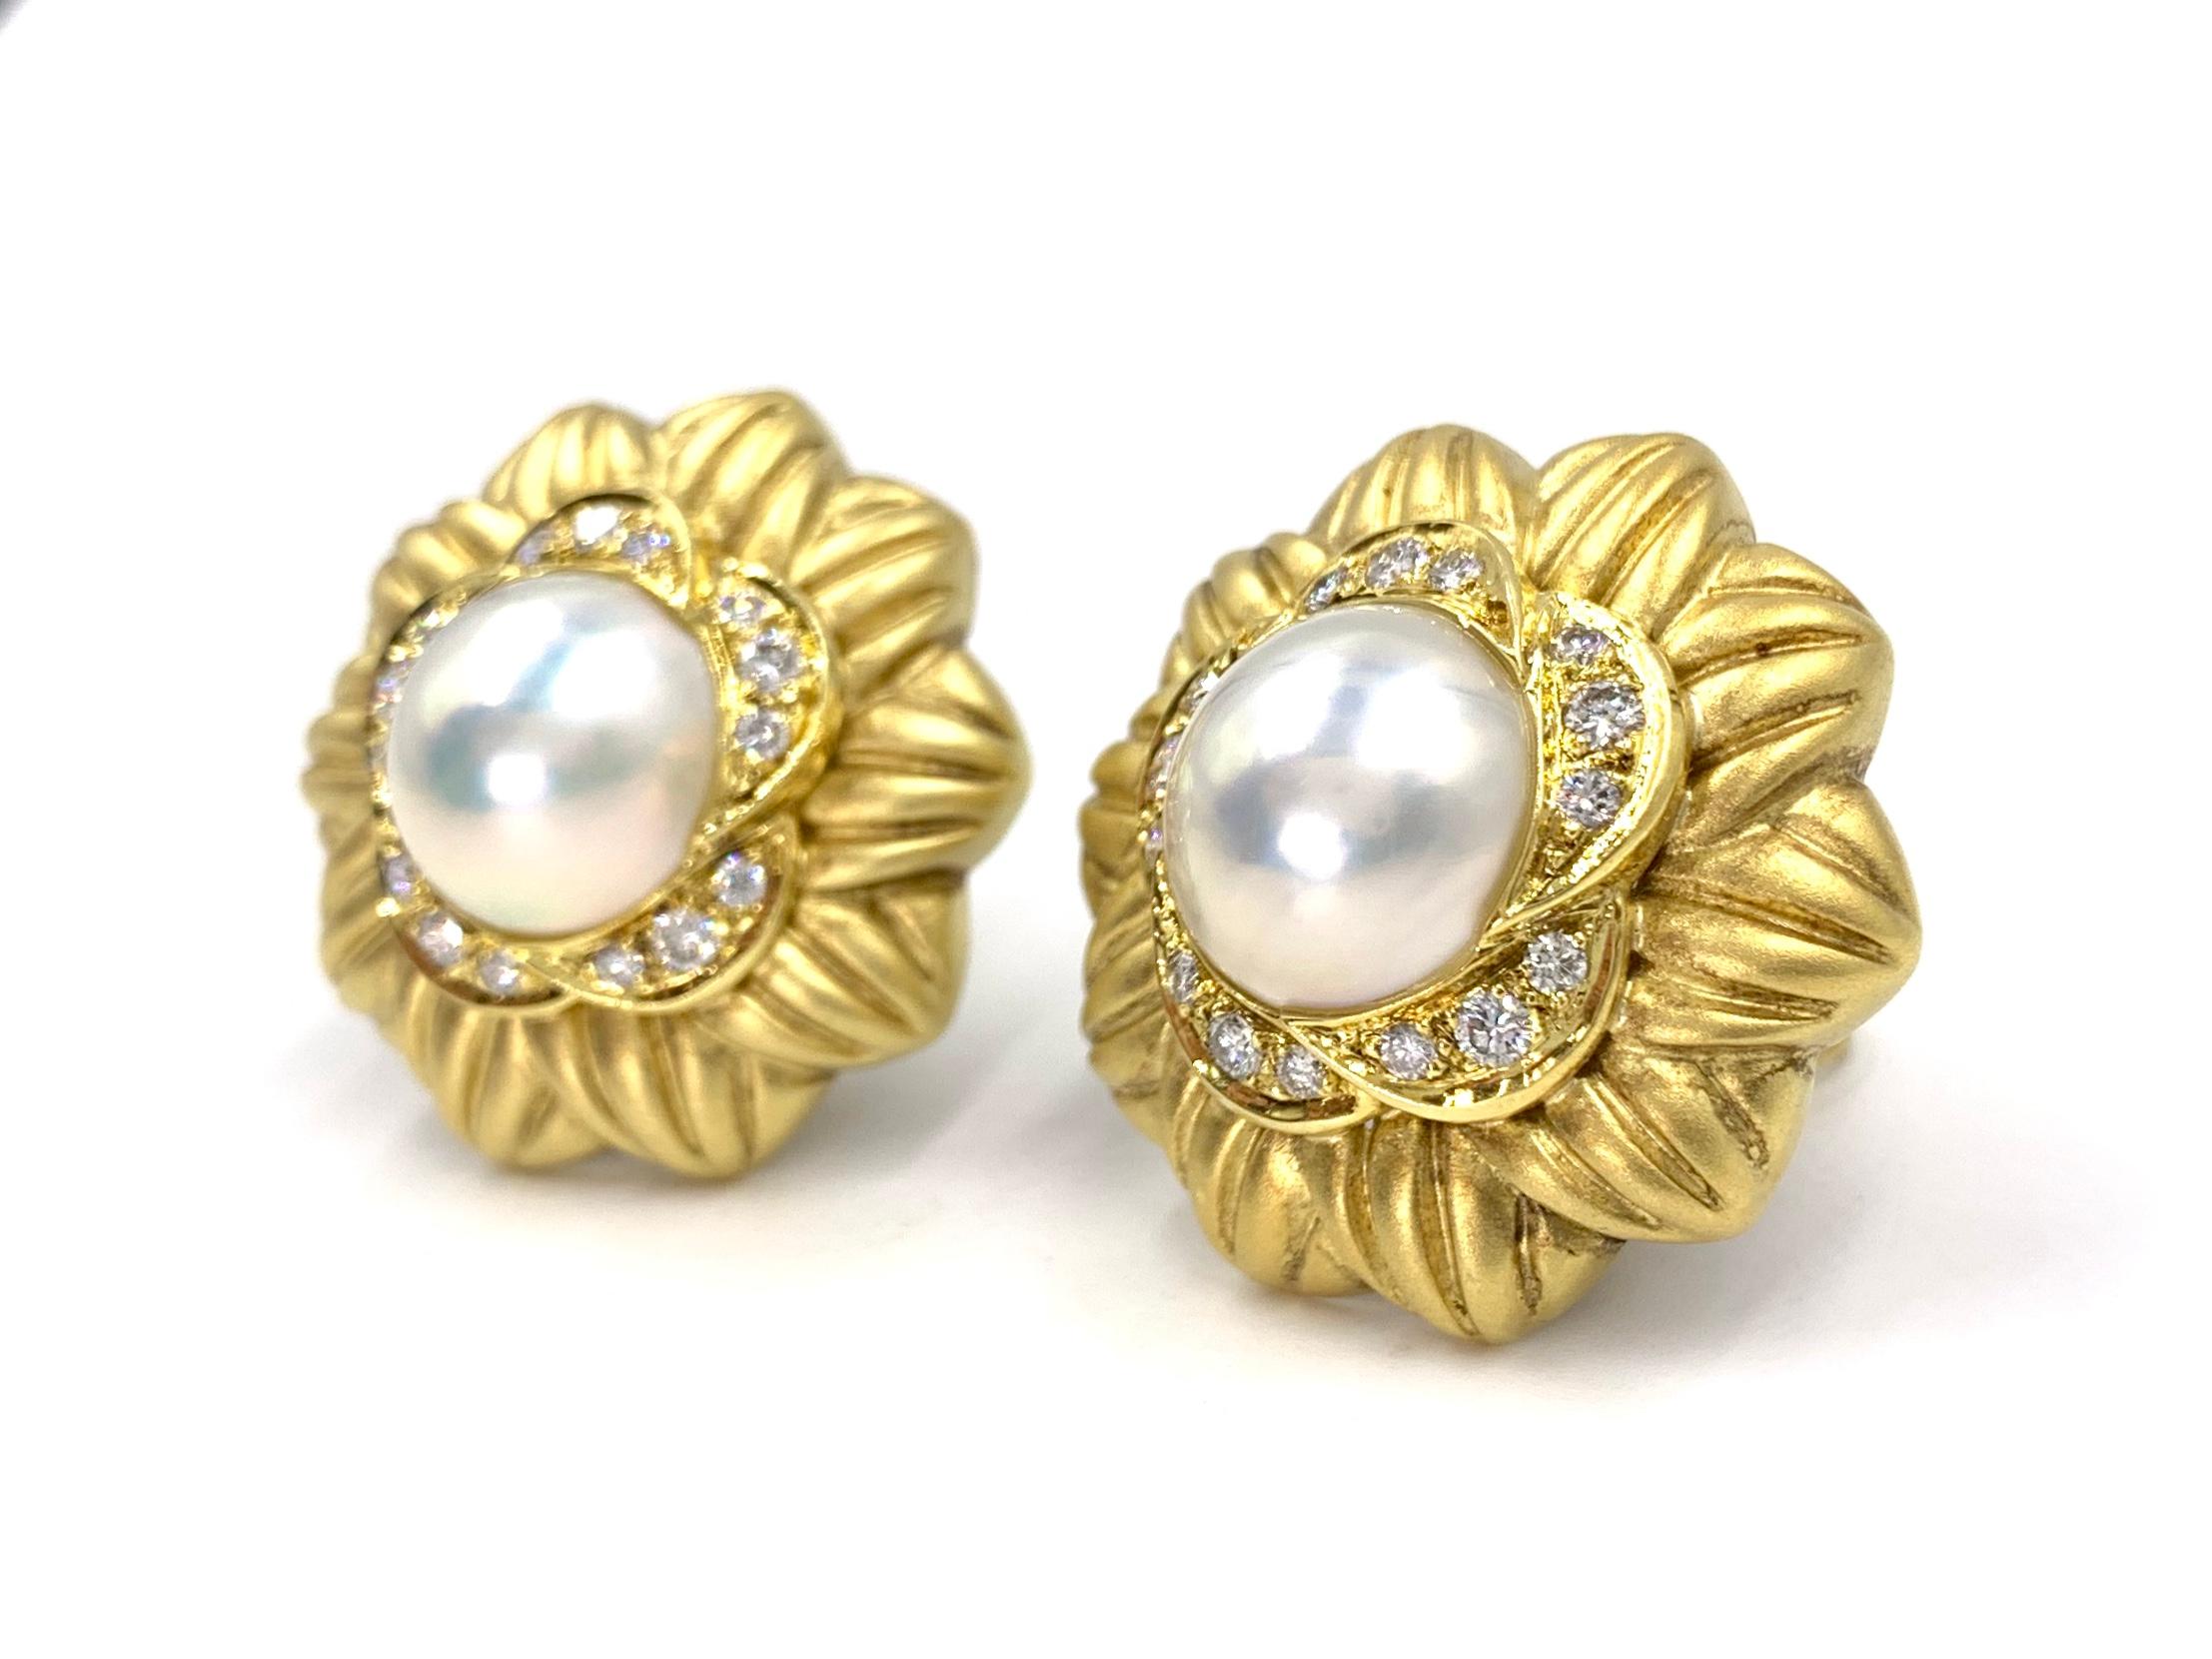 Sophisticated and beautiful acid washed 18 karat yellow gold large floral shaped button style earrings feature 1 carat of round brilliant diamonds and 13mm lustrous cultured mabe pearls. Diamond quality is approximately F color, VS1 clarity. The